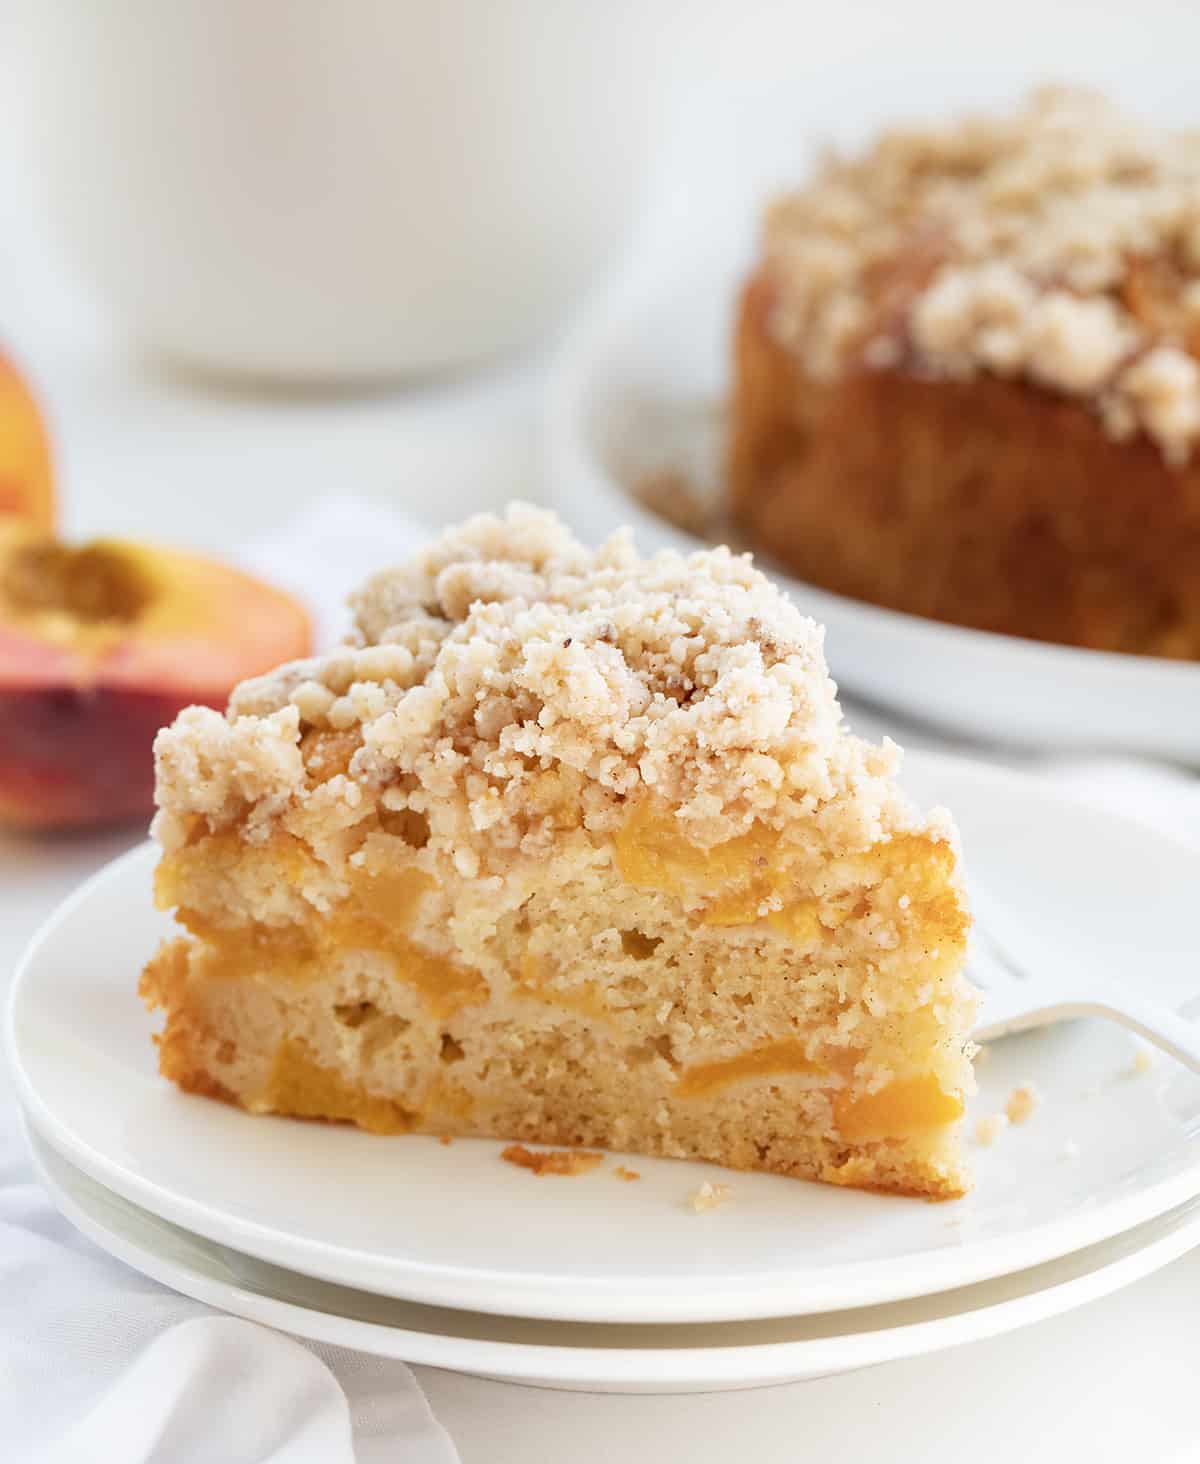 Peach Cake on a Plate with the Whole Cake Behind it and Peaches.